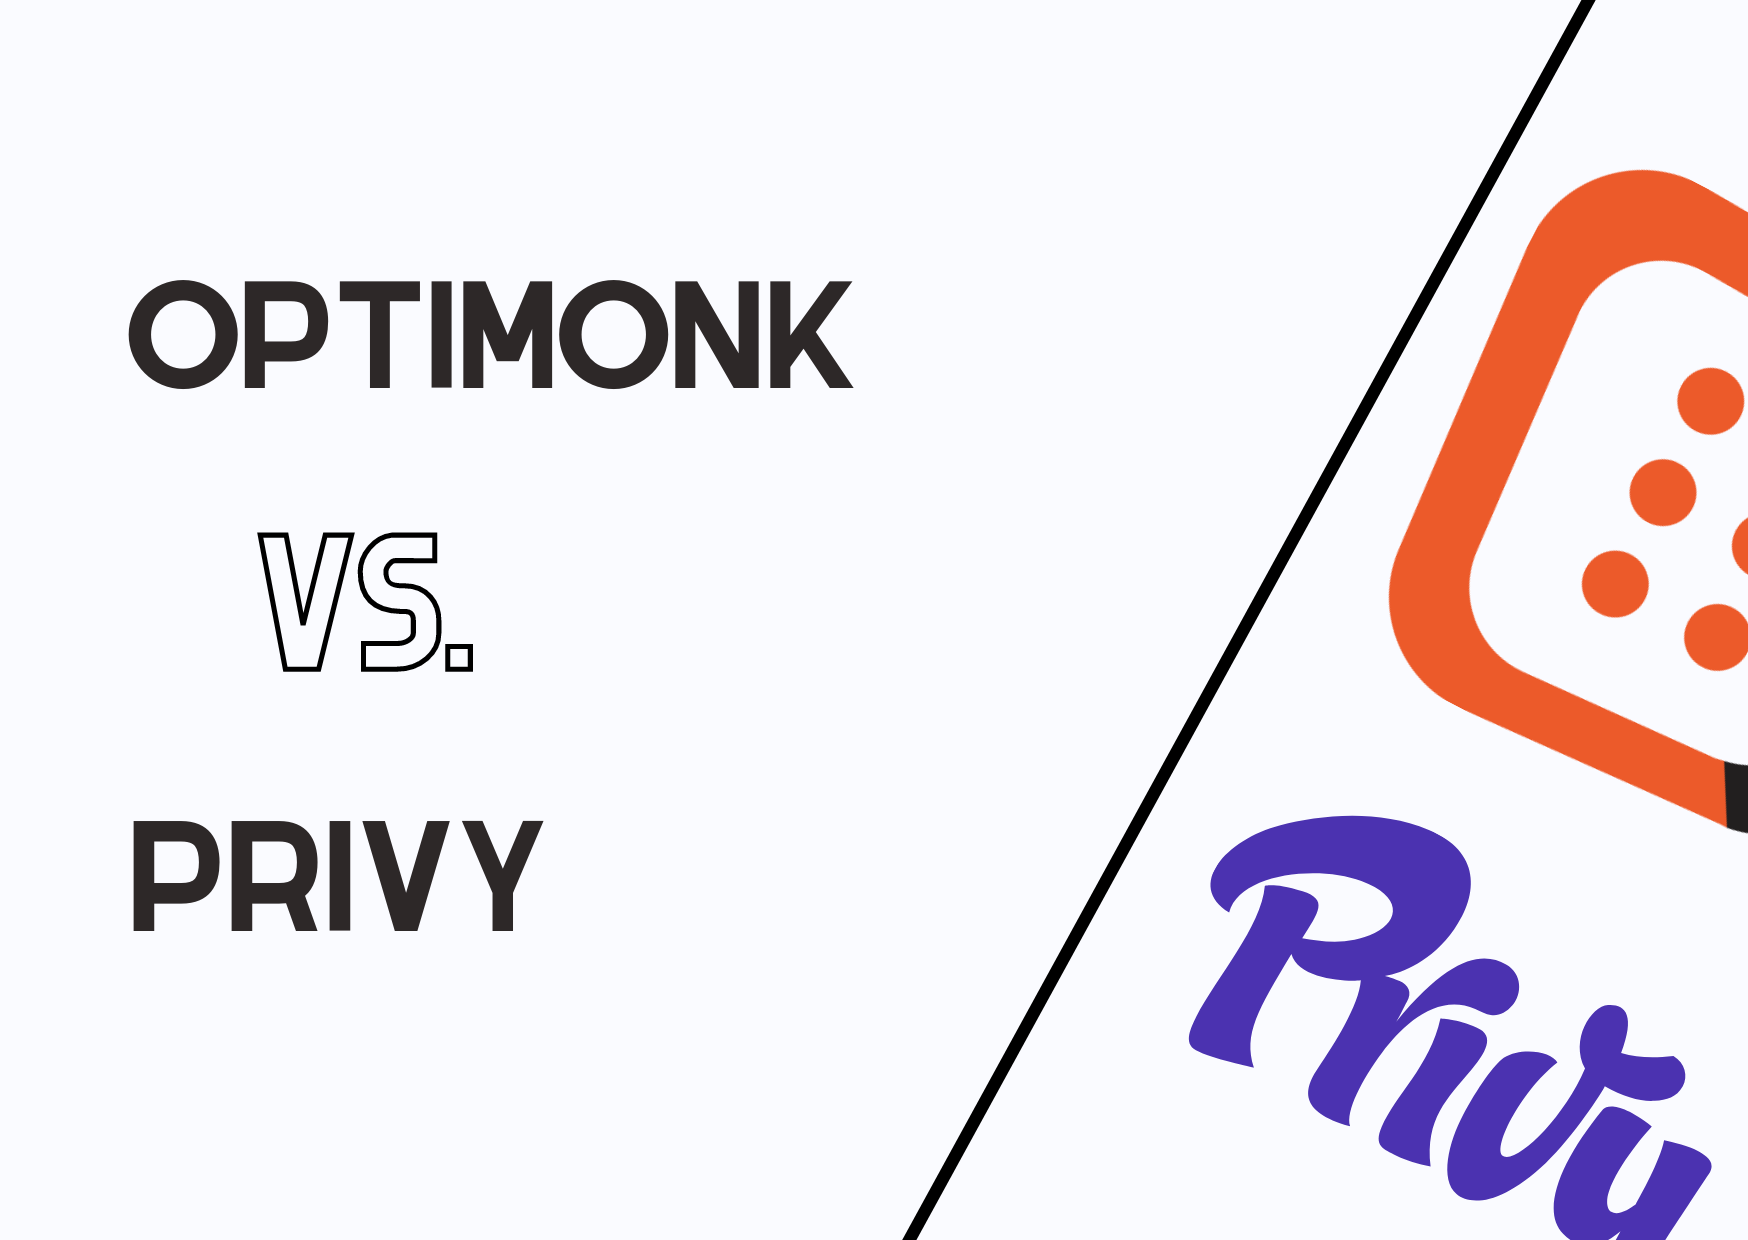 the banner of OptiMonk and Privy comparison